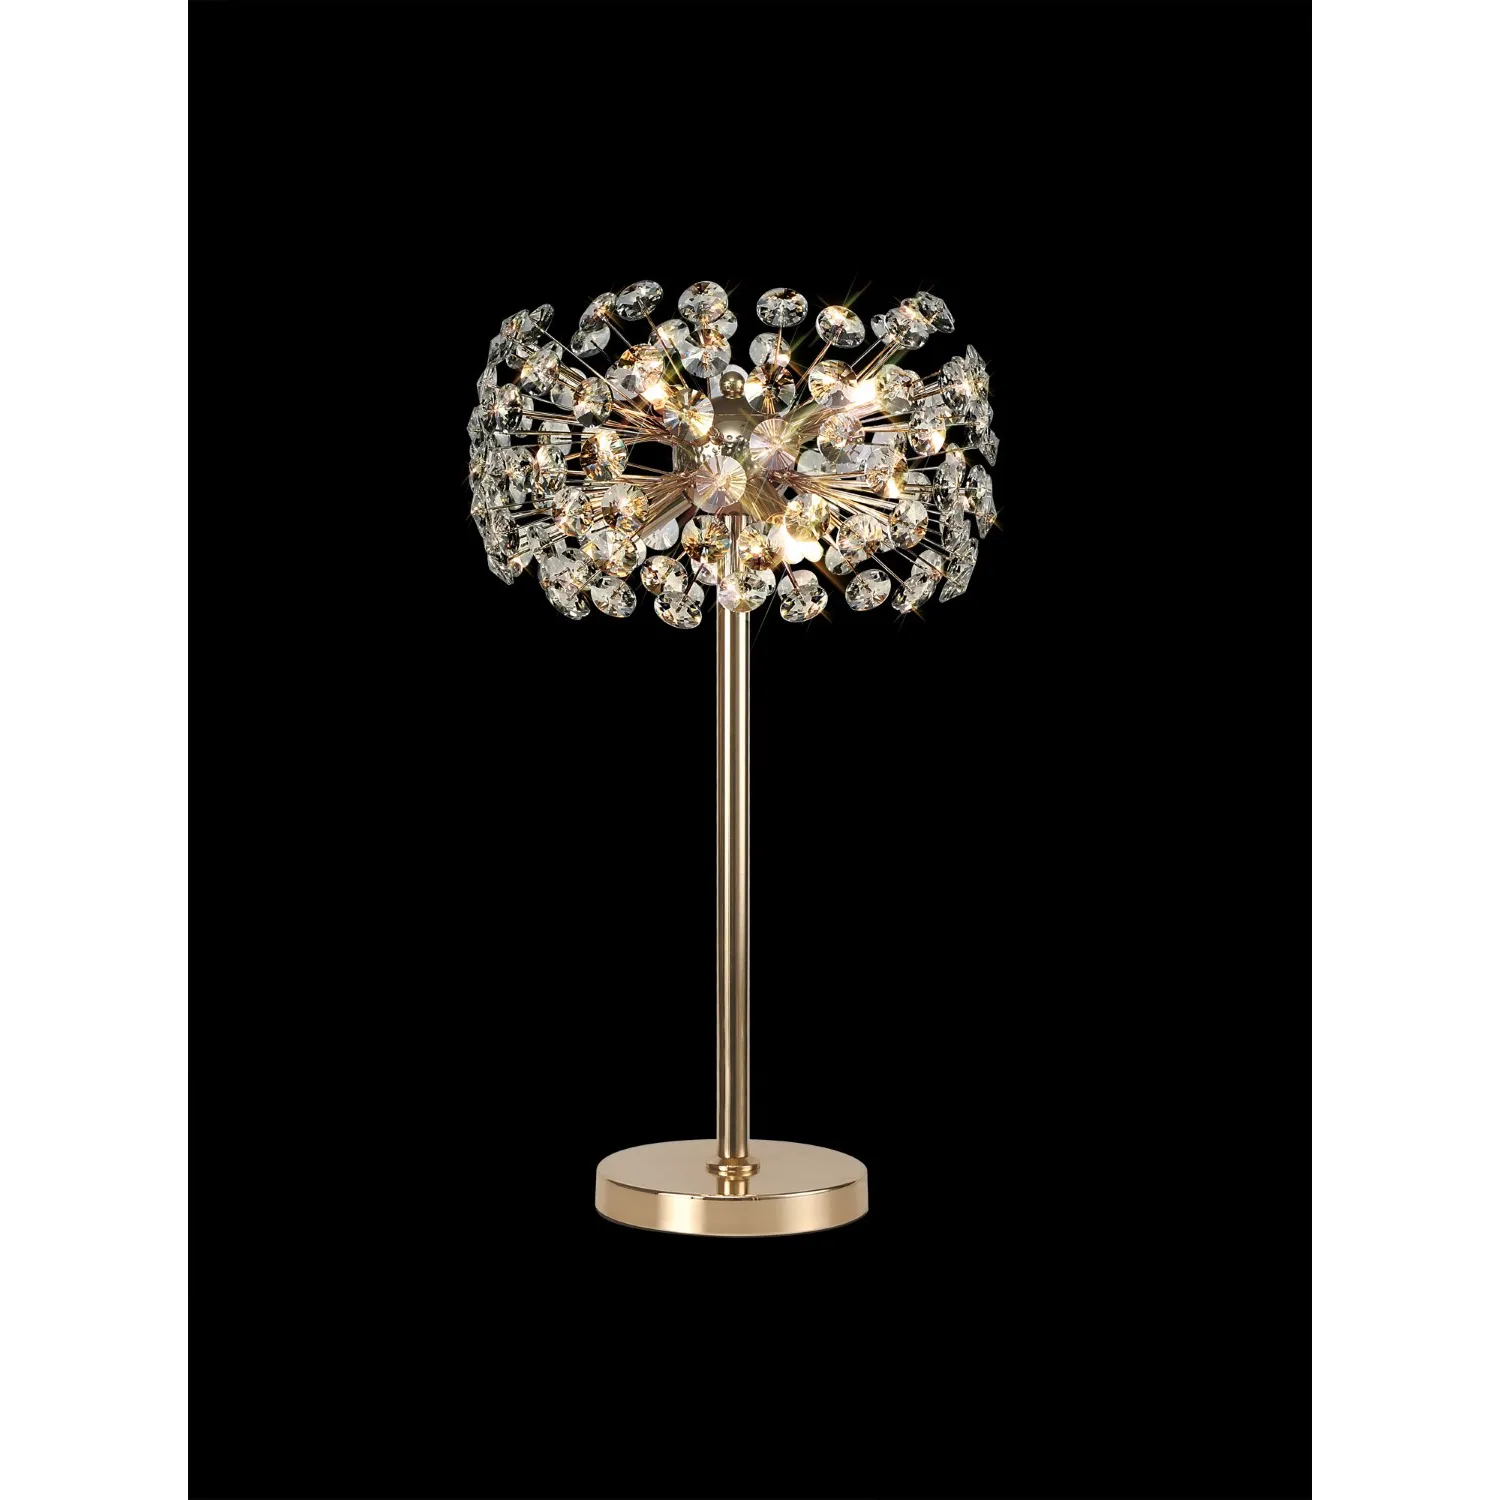 Camden Table Lamp 6 Light G9 French Gold Crystal